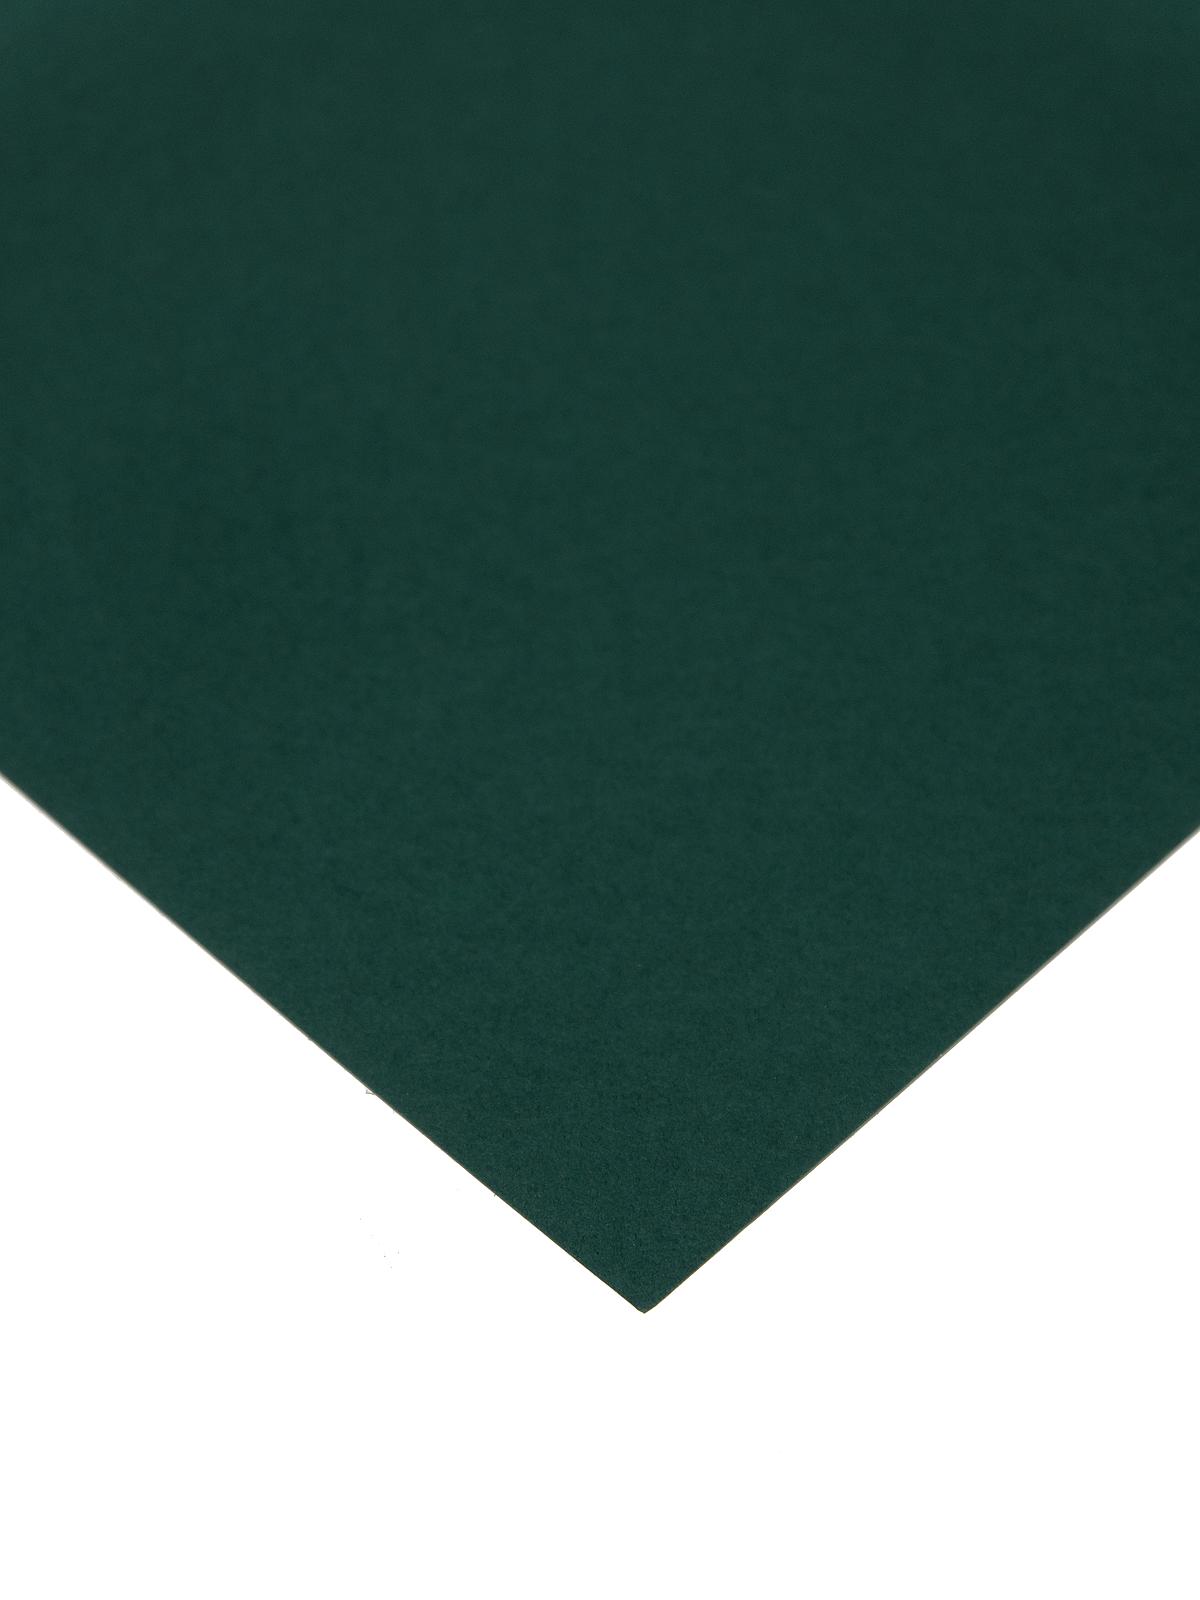 Classic 80 Lb. 8 1 2 In. X 11 In. Sheet Forest Green